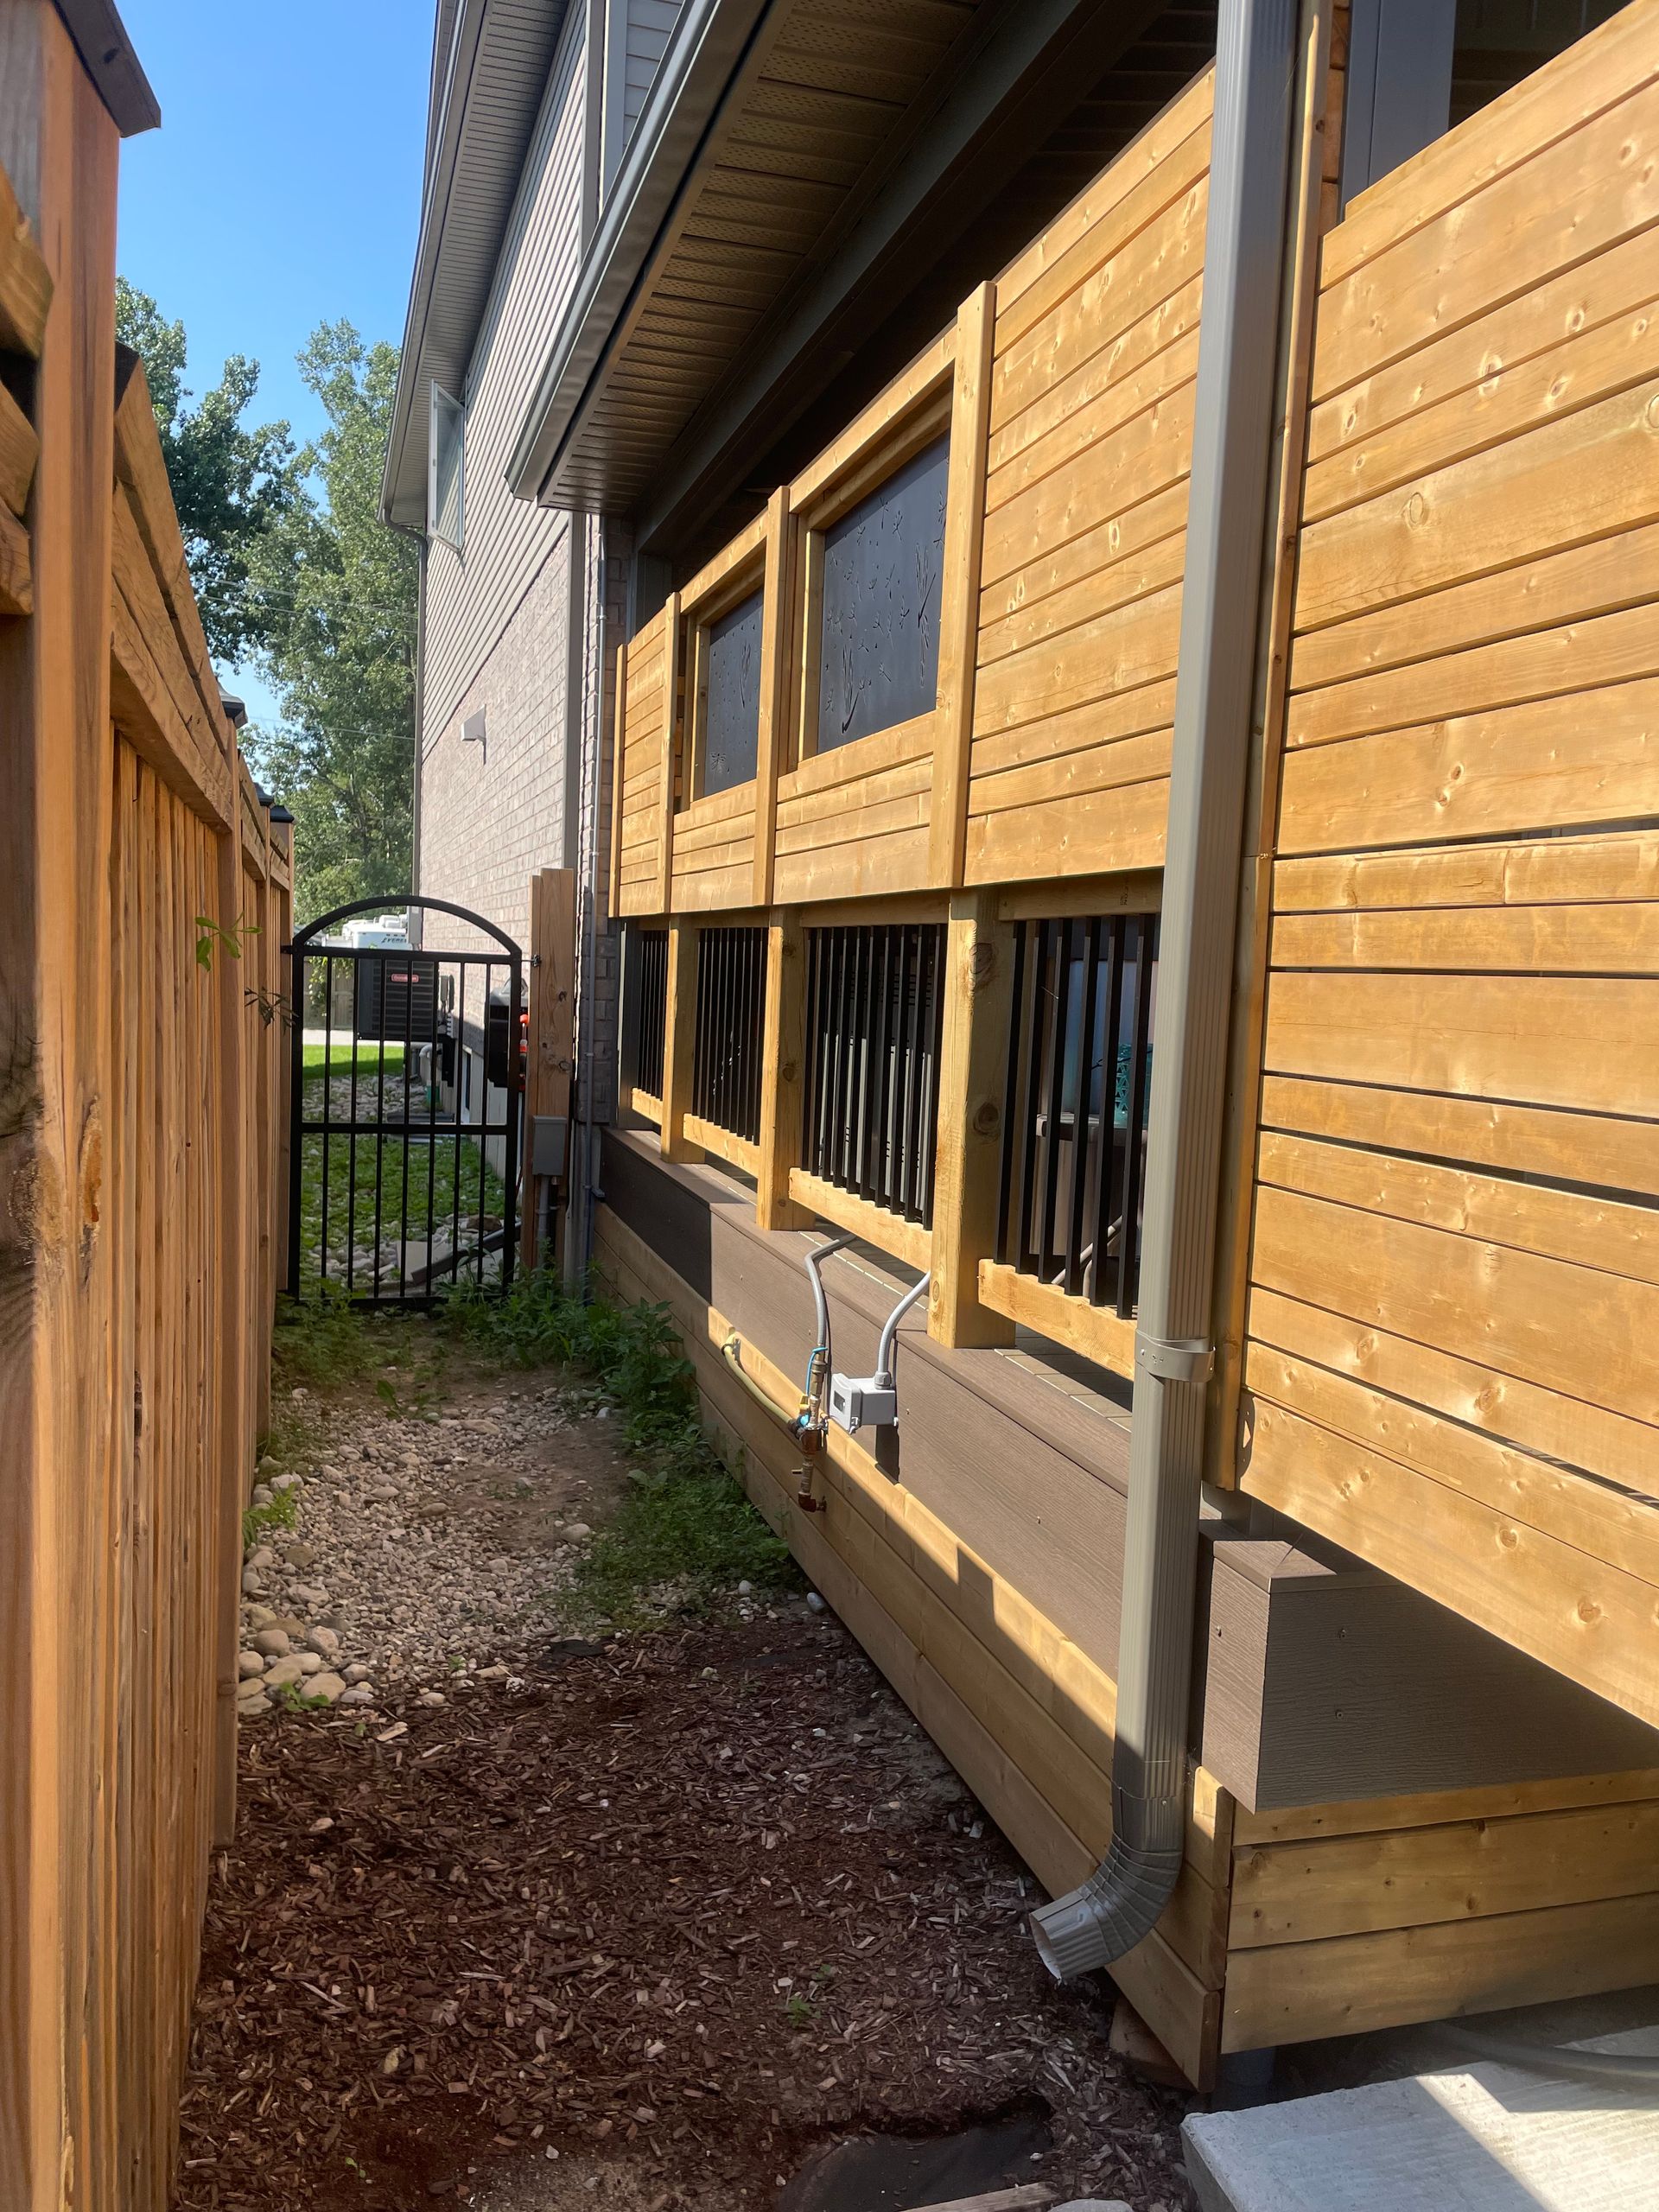 newly installed wooden fence and patio railings